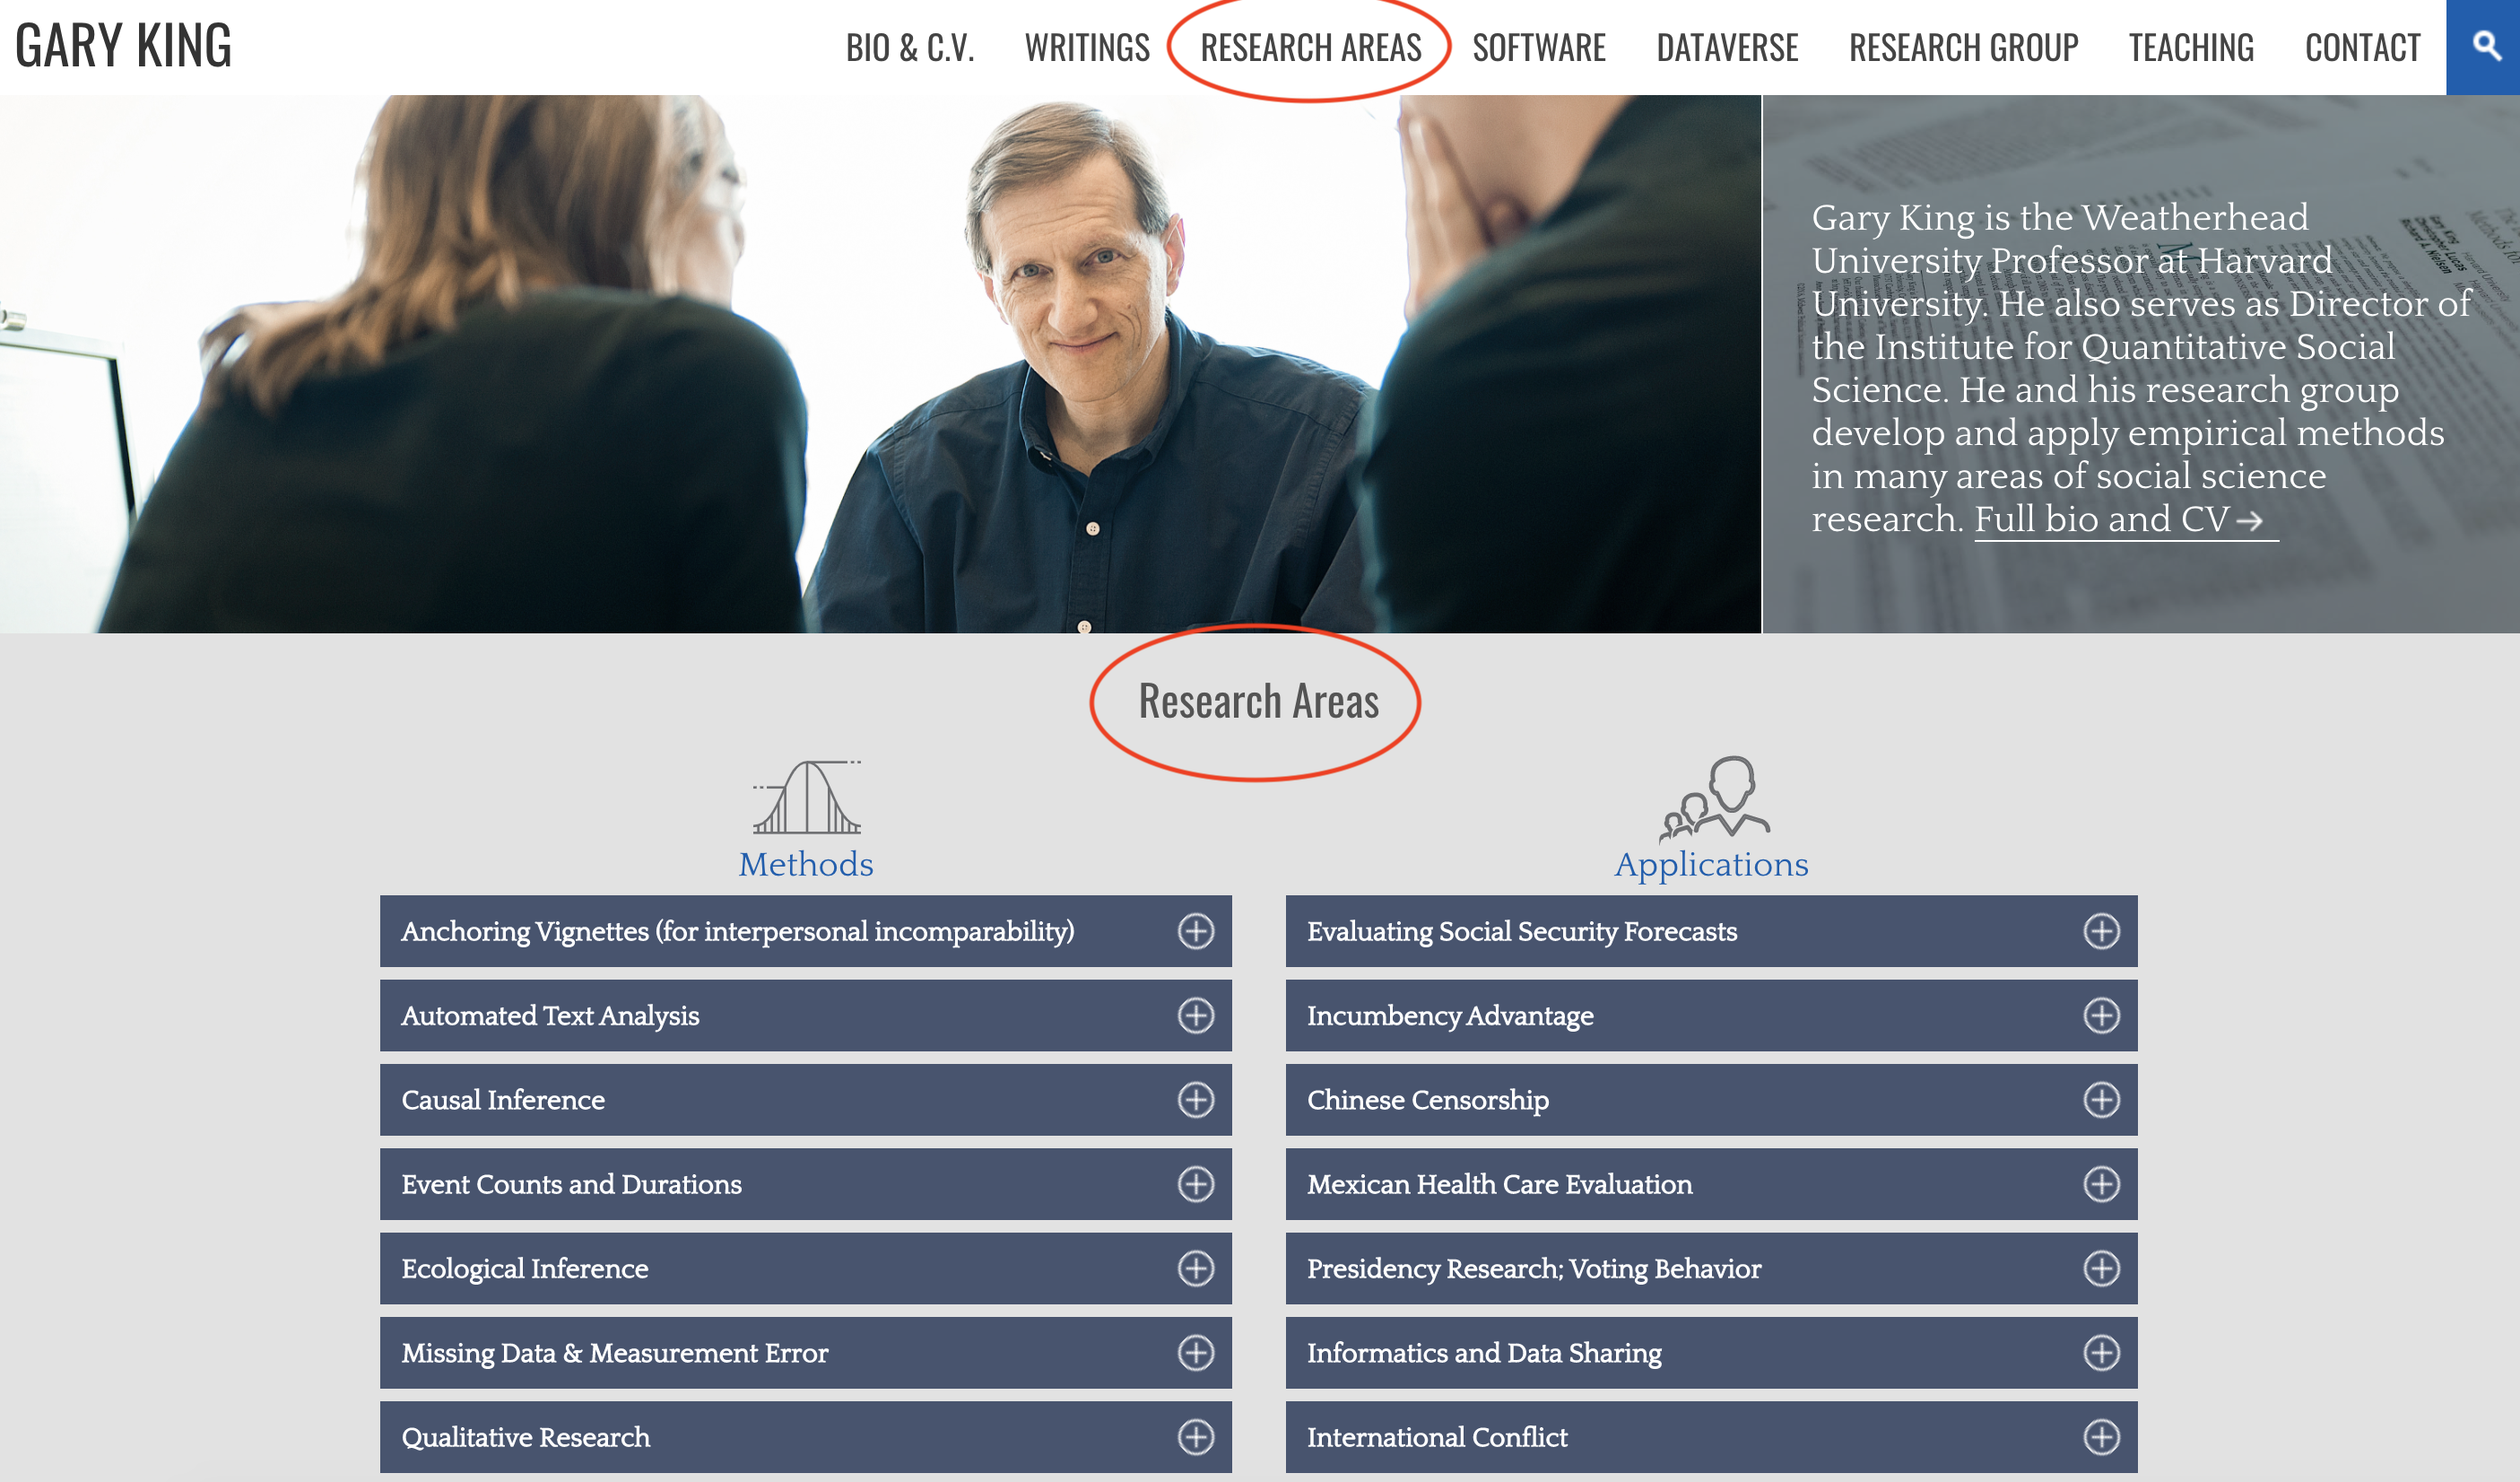 Faculty website for research presentation